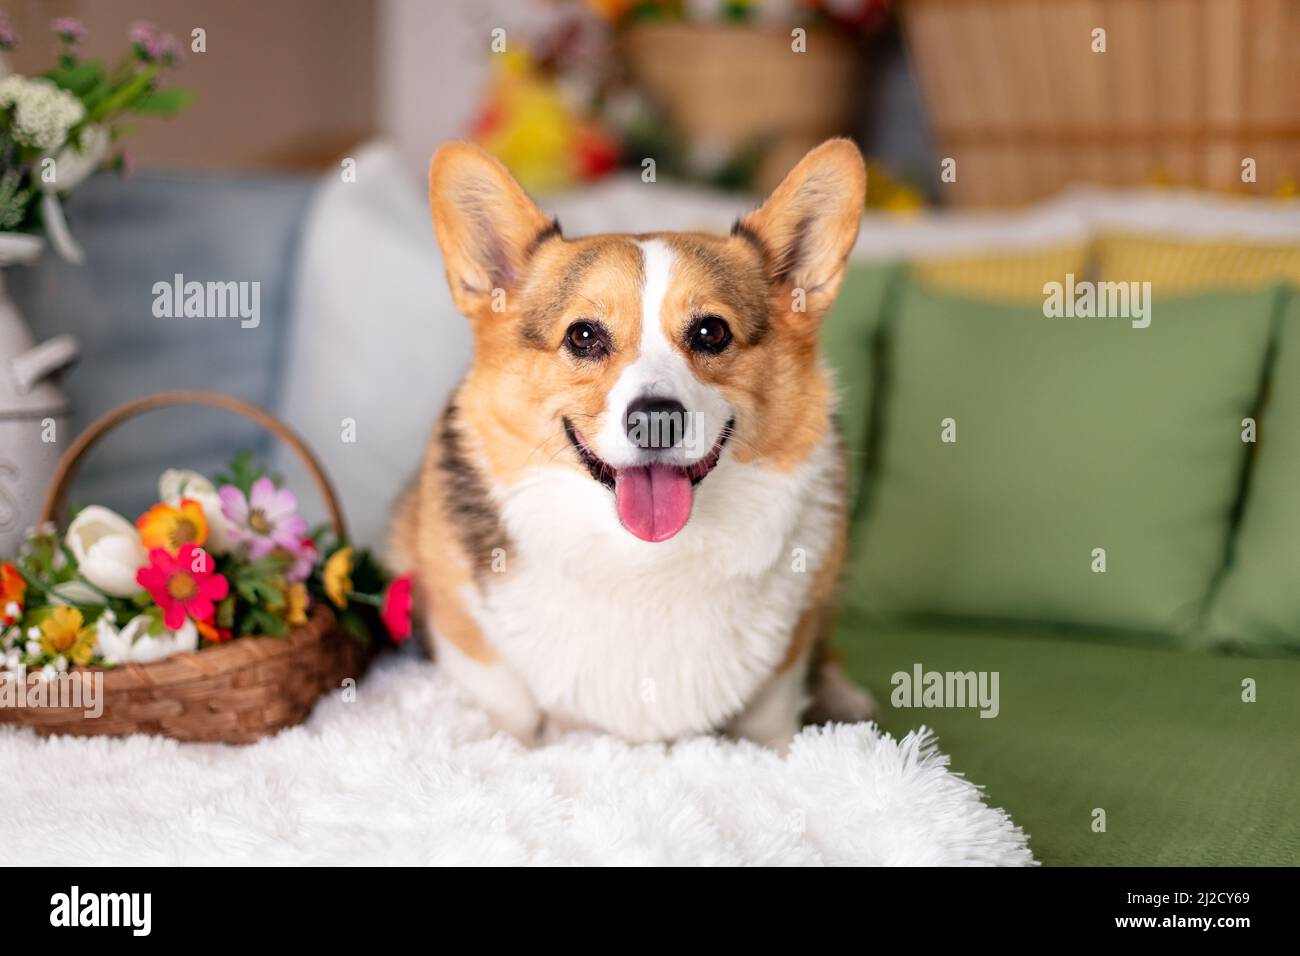 Pembroke Welsh Corgi sitting on a bed with spring flowers Stock Photo